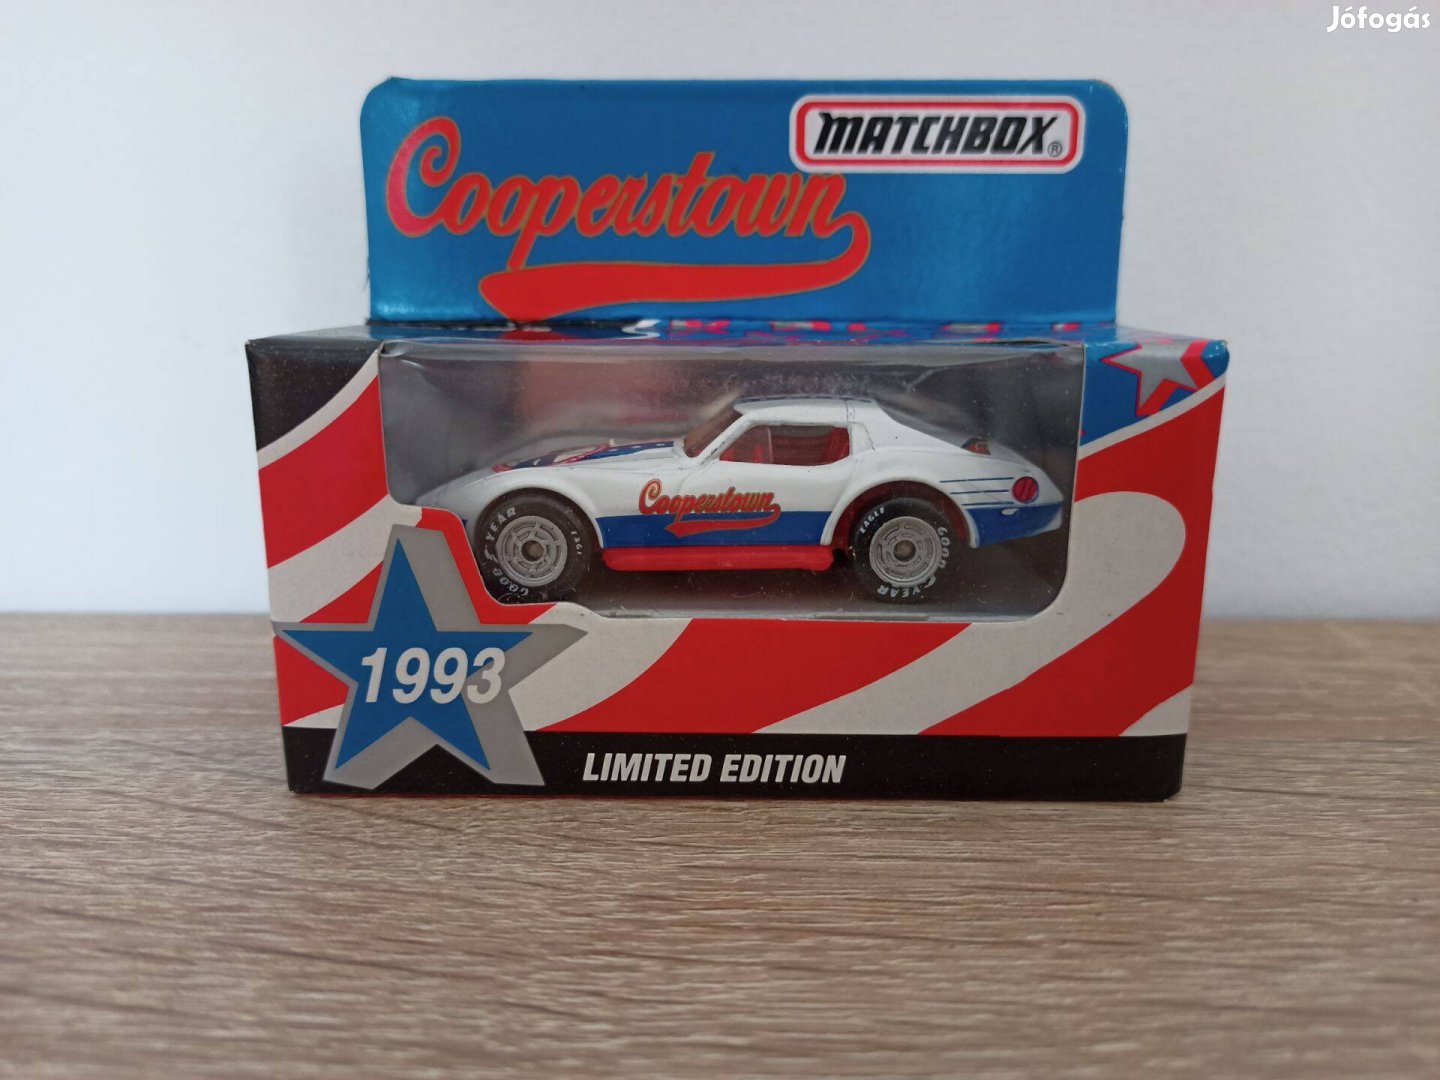 Matchbox - 1993 - Chevy Corvette - Cooperstown - New AND Boxed